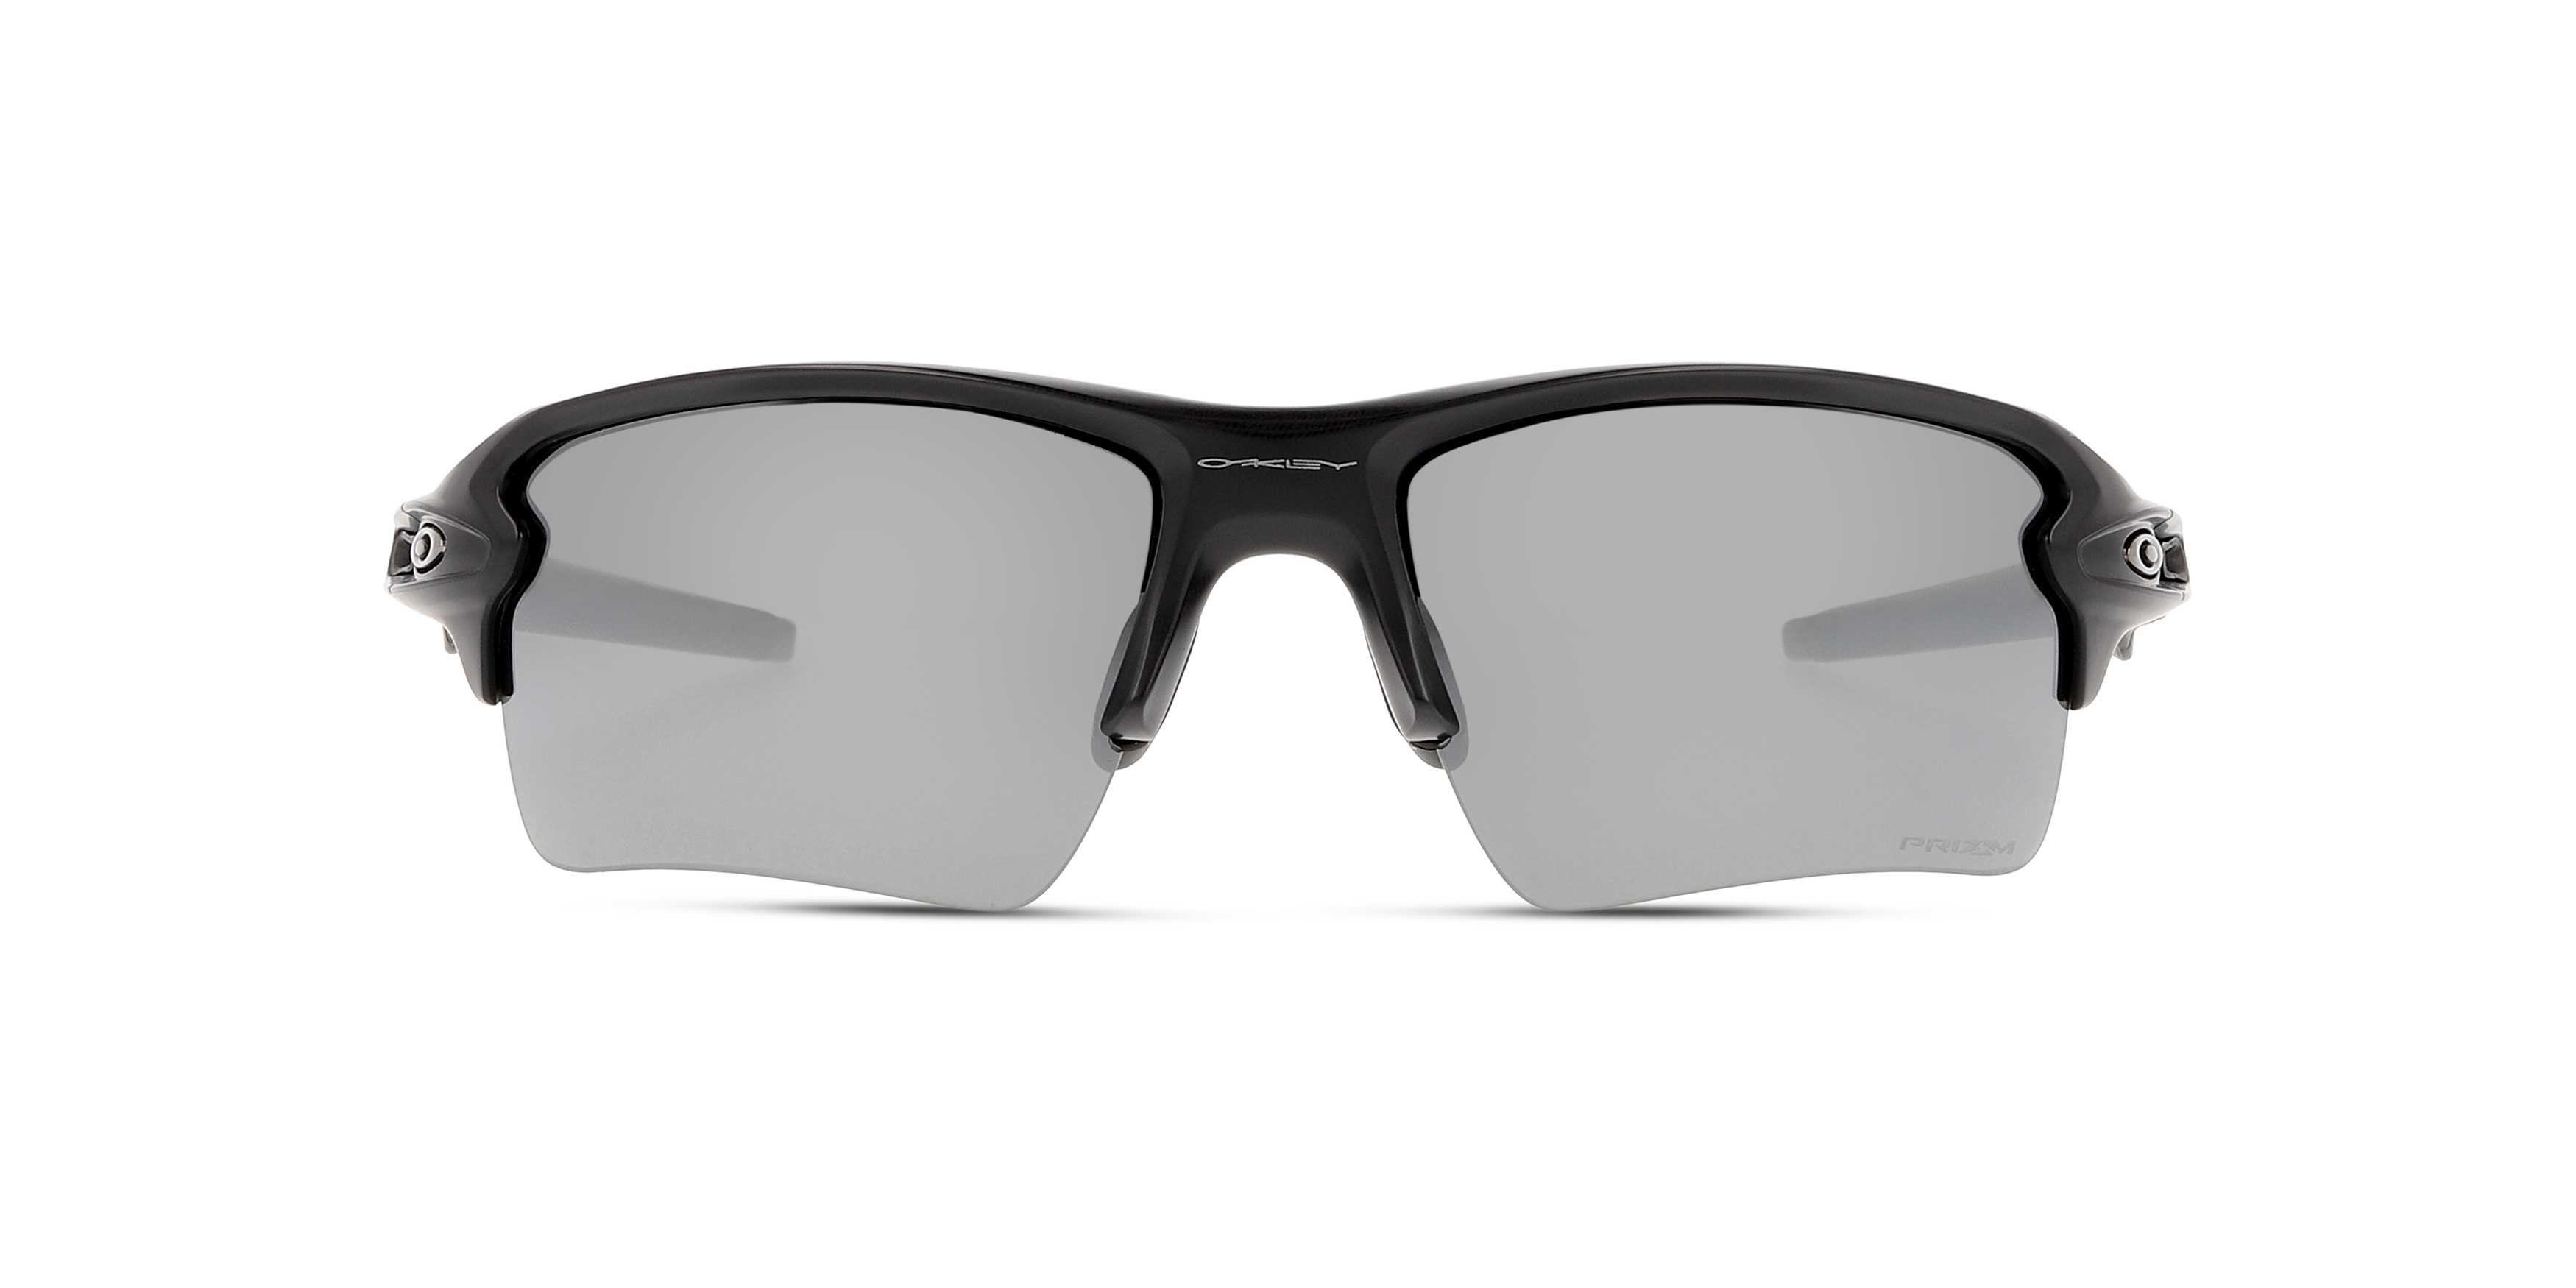 [products.image.front] OAKLEY FLAK 2.0 XL OO9188 918873